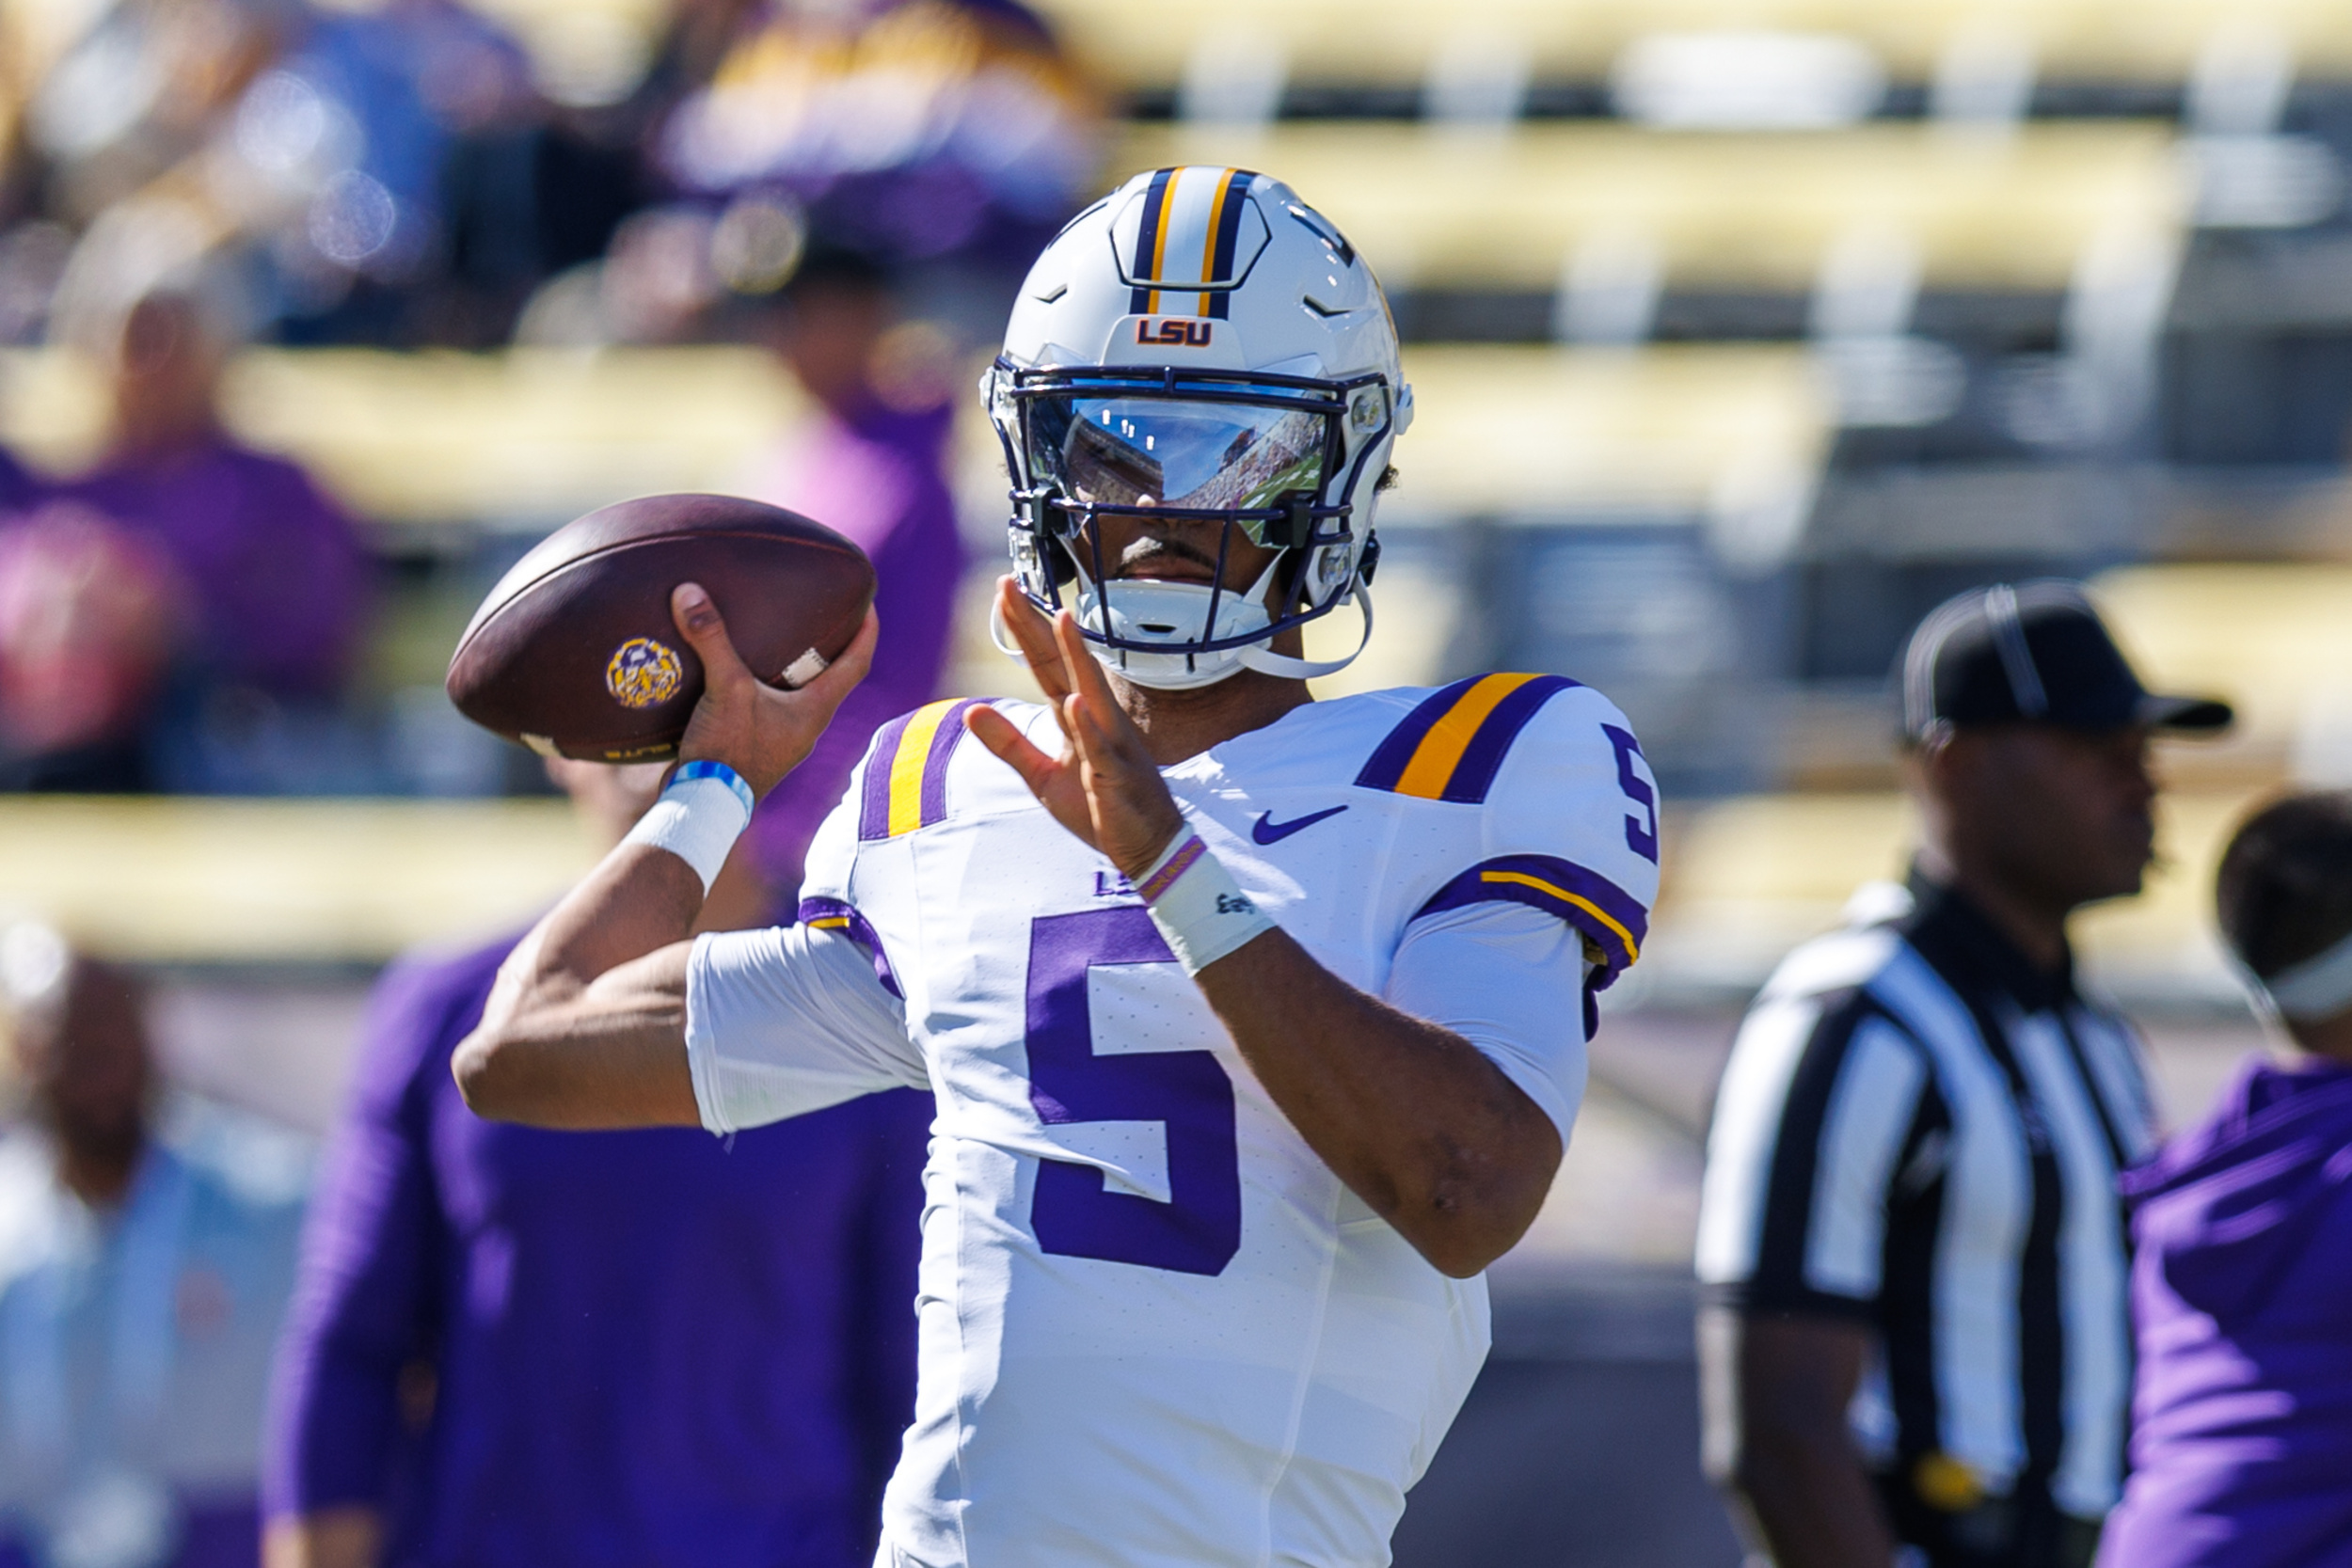 final nfl mock draft roundup: three teams trade into the top five for qb